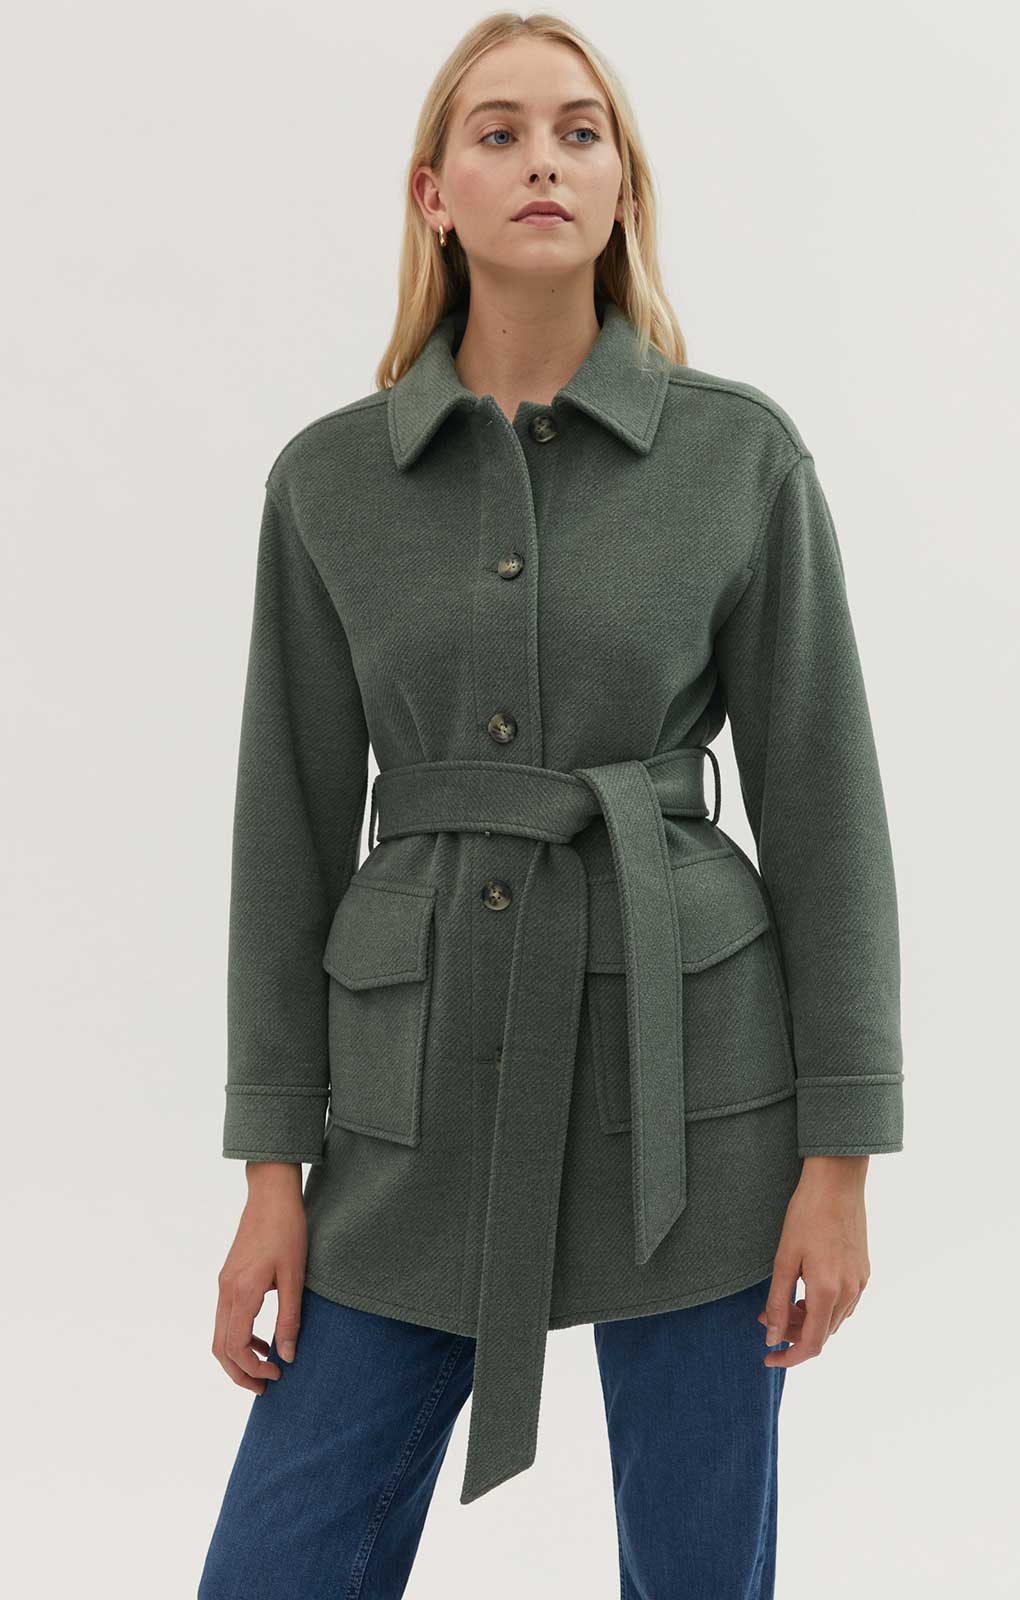 M&S Khaki Marl Relaxed Belted Collared Shacket product image